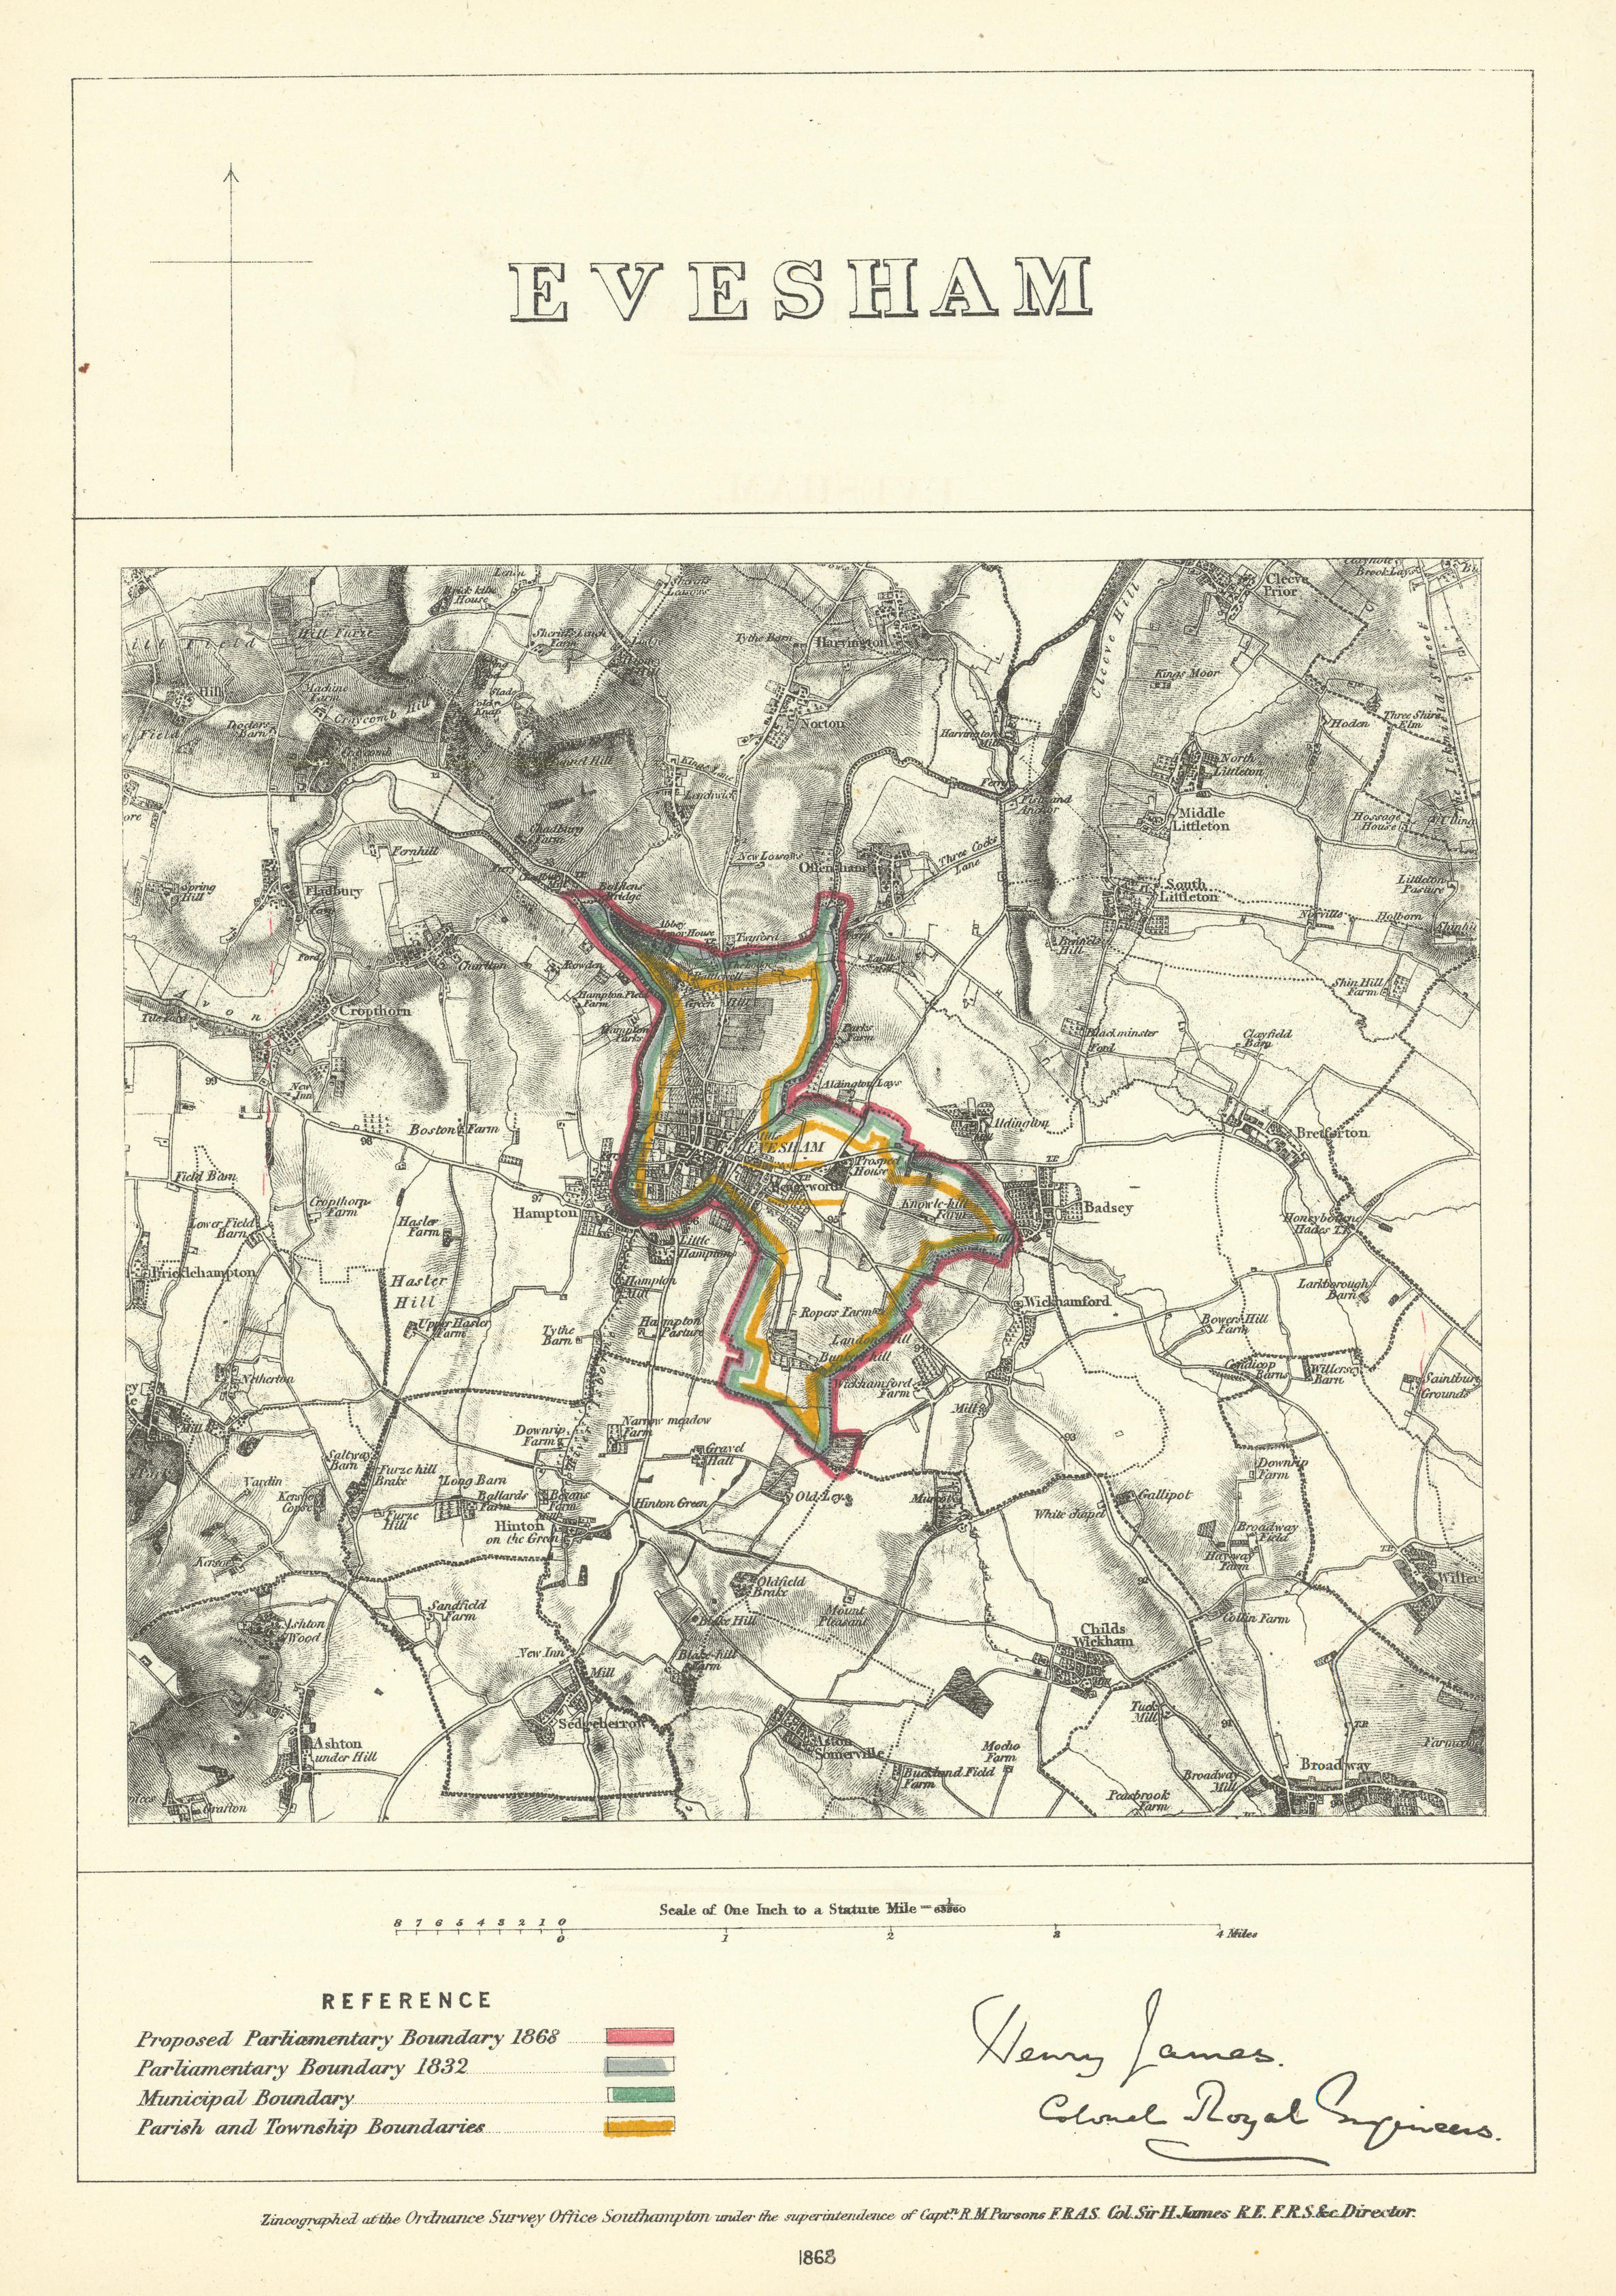 Associate Product Evesham, Worcestershire. JAMES. Parliamentary Boundary Commission 1868 old map